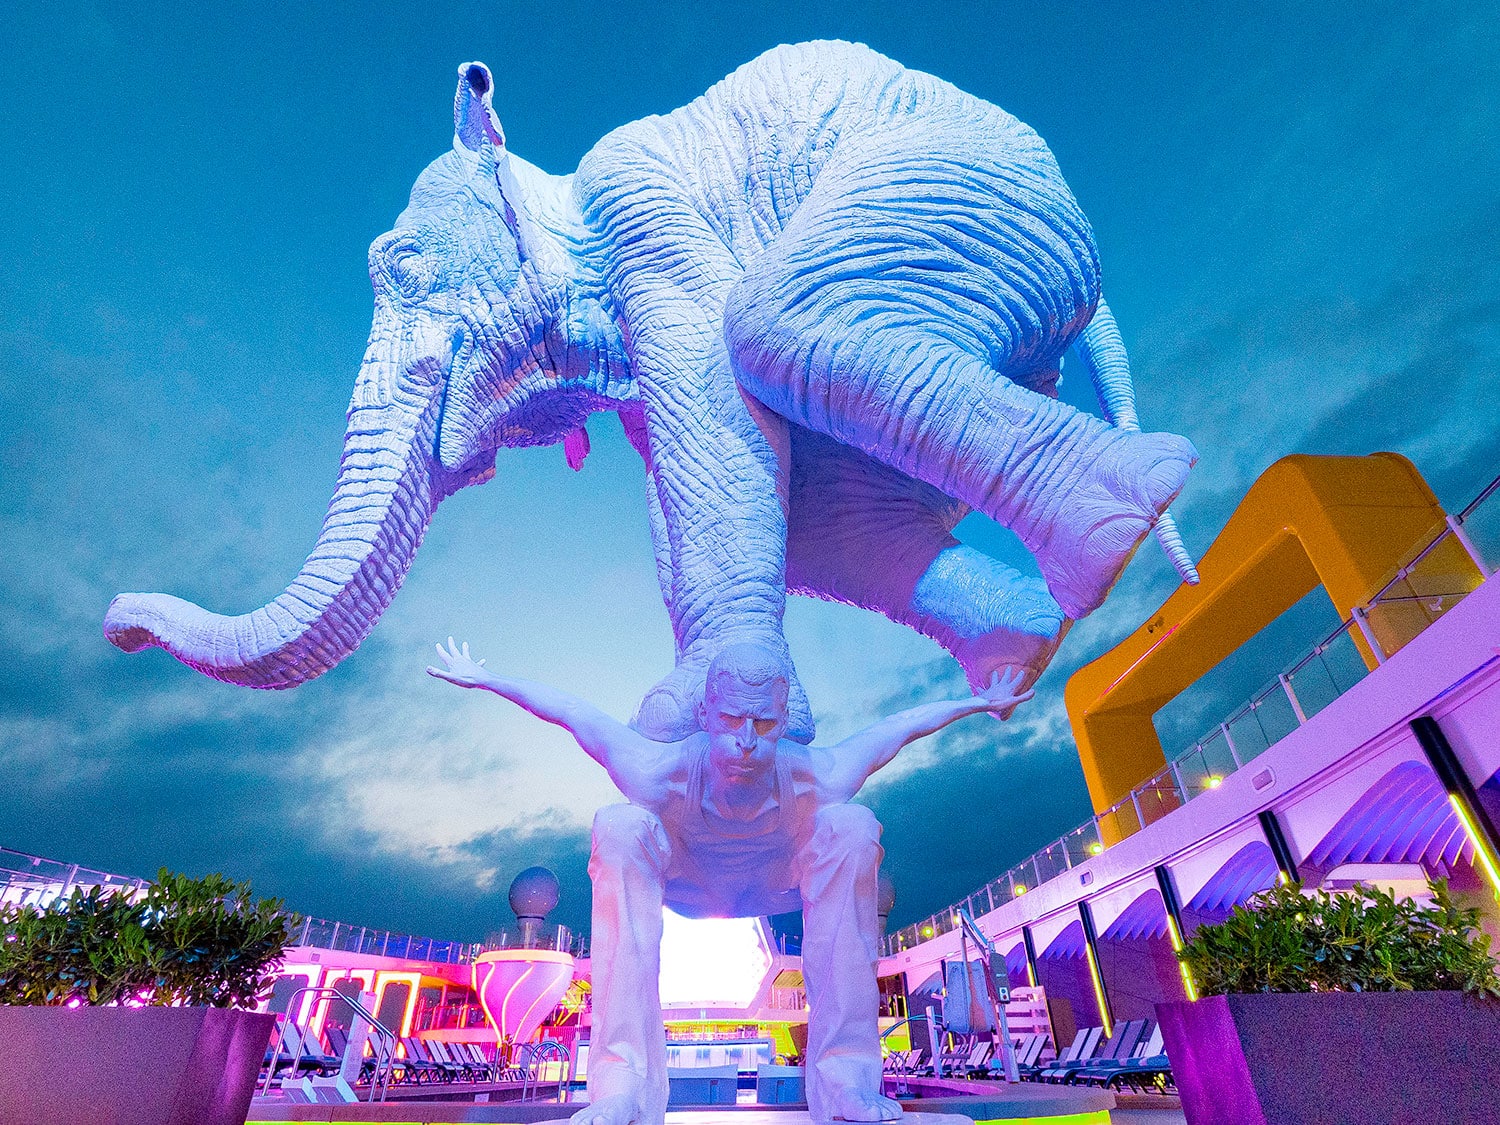 A sculpture of an elephant balancing on a man’s back, created by French sculptor Fabien Merelle’s L’origine for the Celebrity Beyond cruise ship.